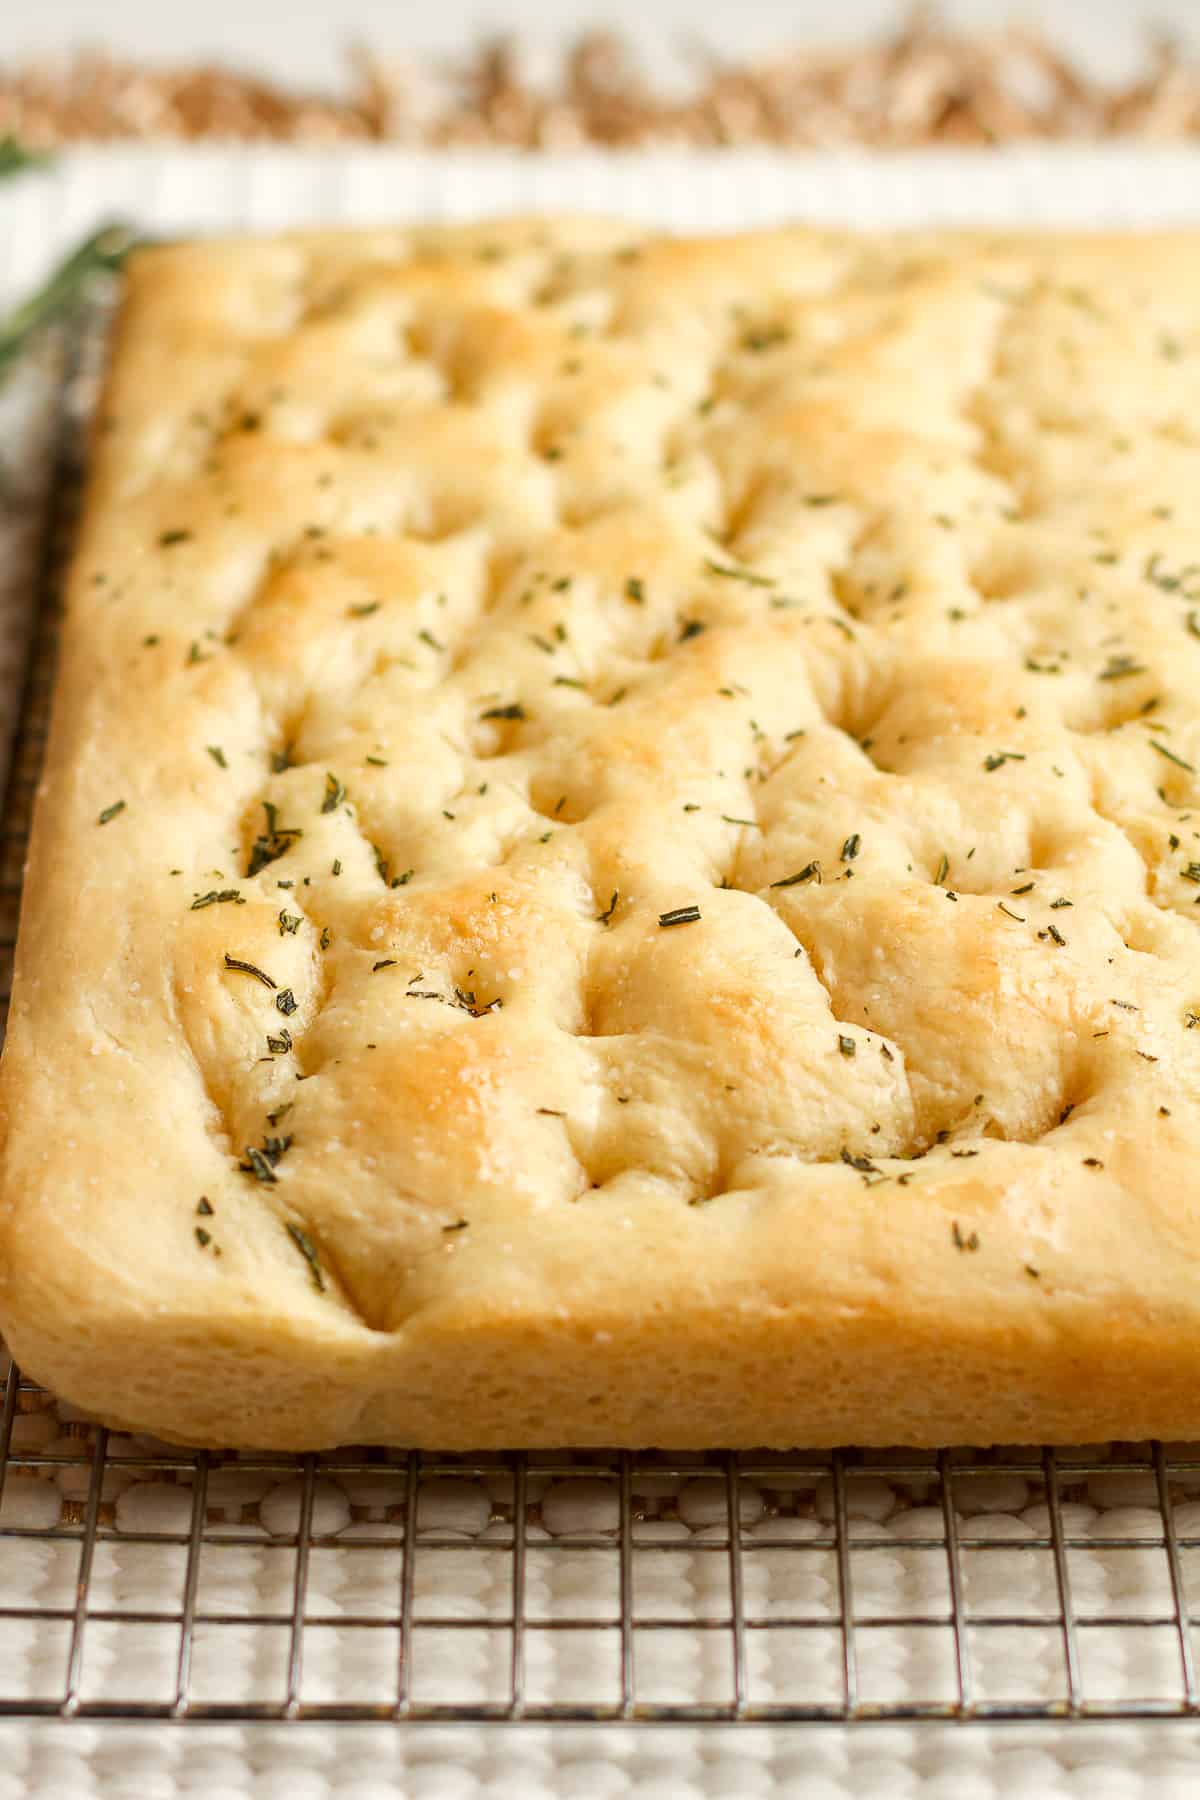 Side view of the baked focaccia.